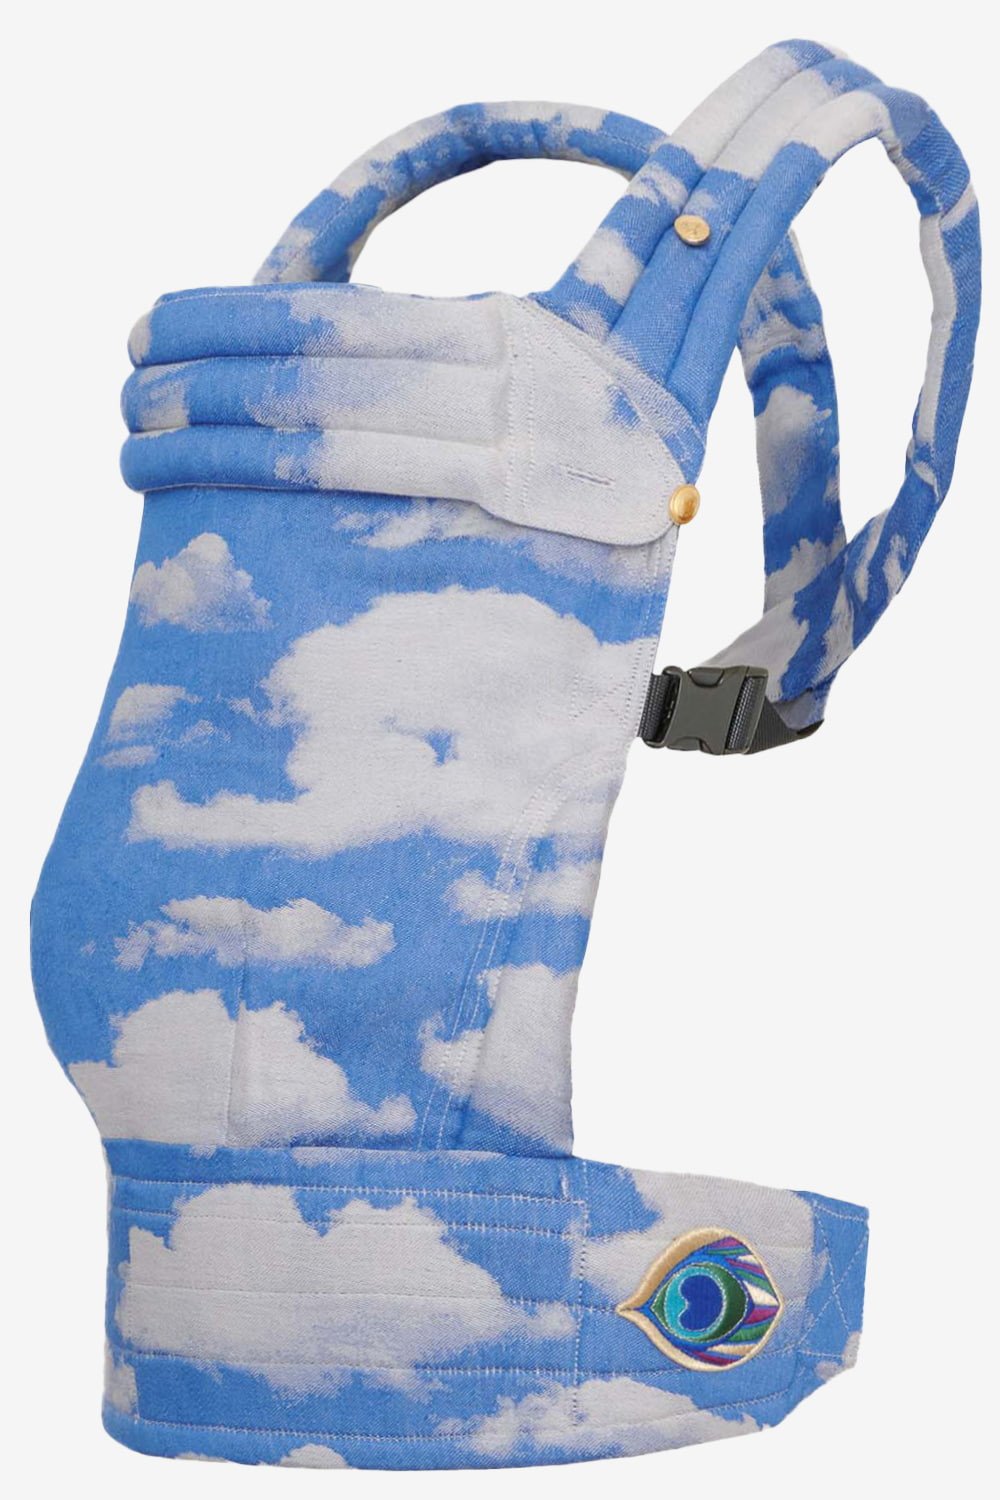 Blue baby carrier with clouds in a linen blend